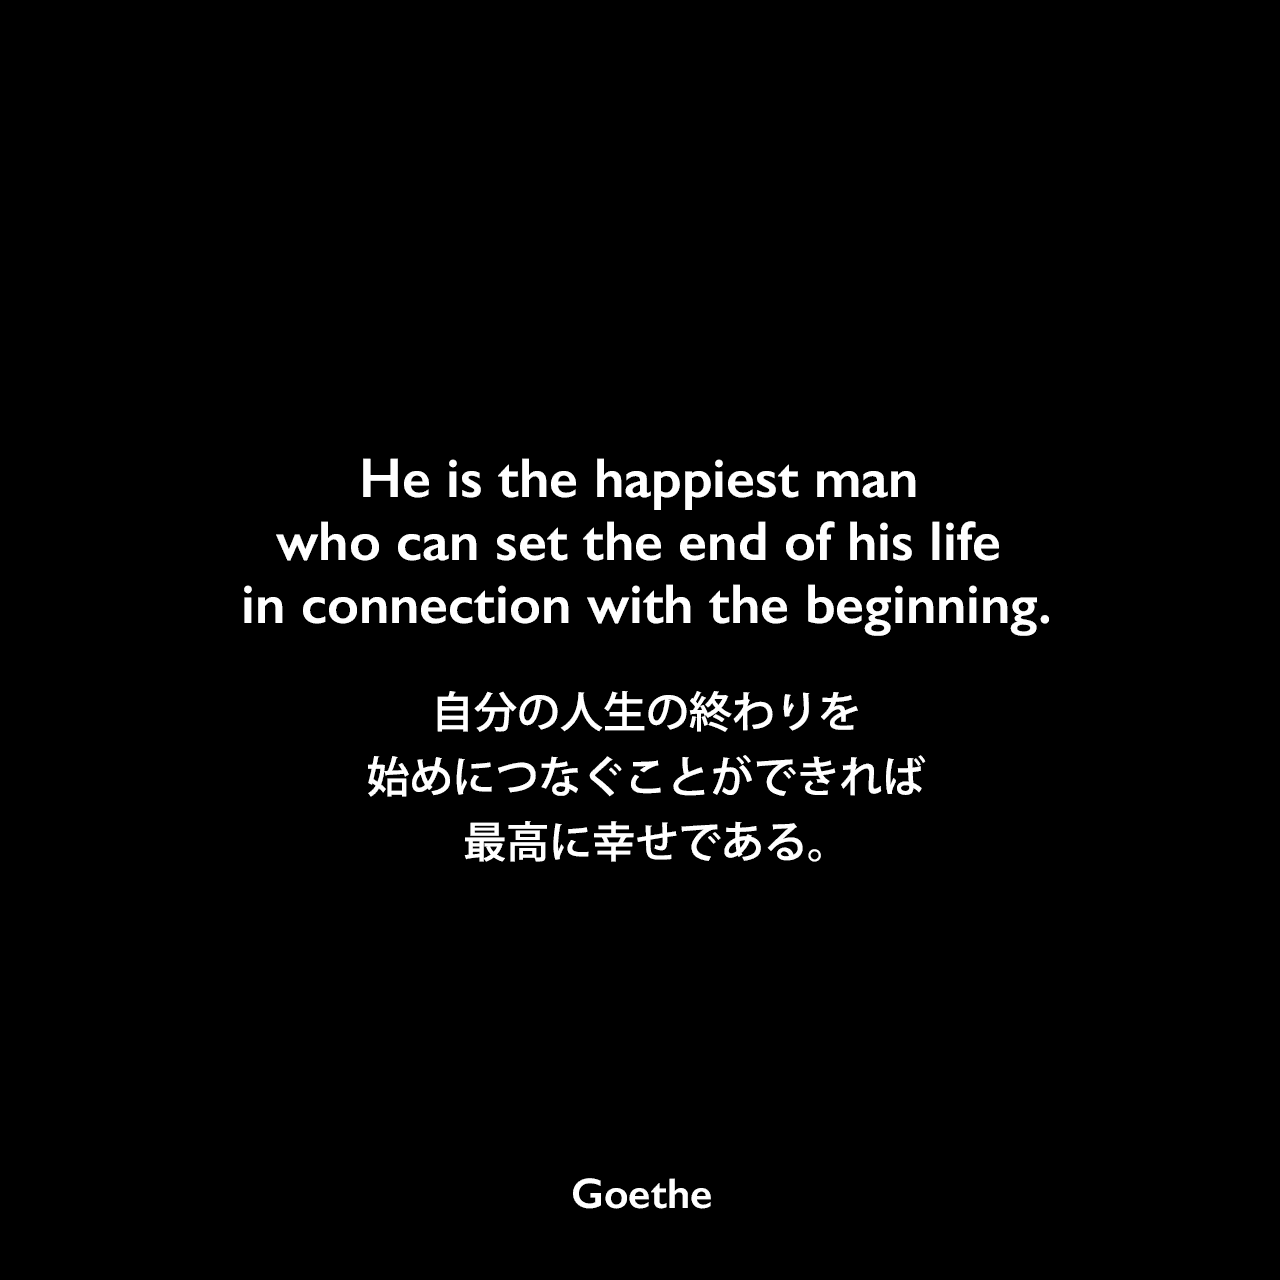 He is the happiest man who can set the end of his life in connection with the beginning.自分の人生の終わりを始めにつなぐことのできれば最高に幸せである。Johann Wolfgang von Goethe